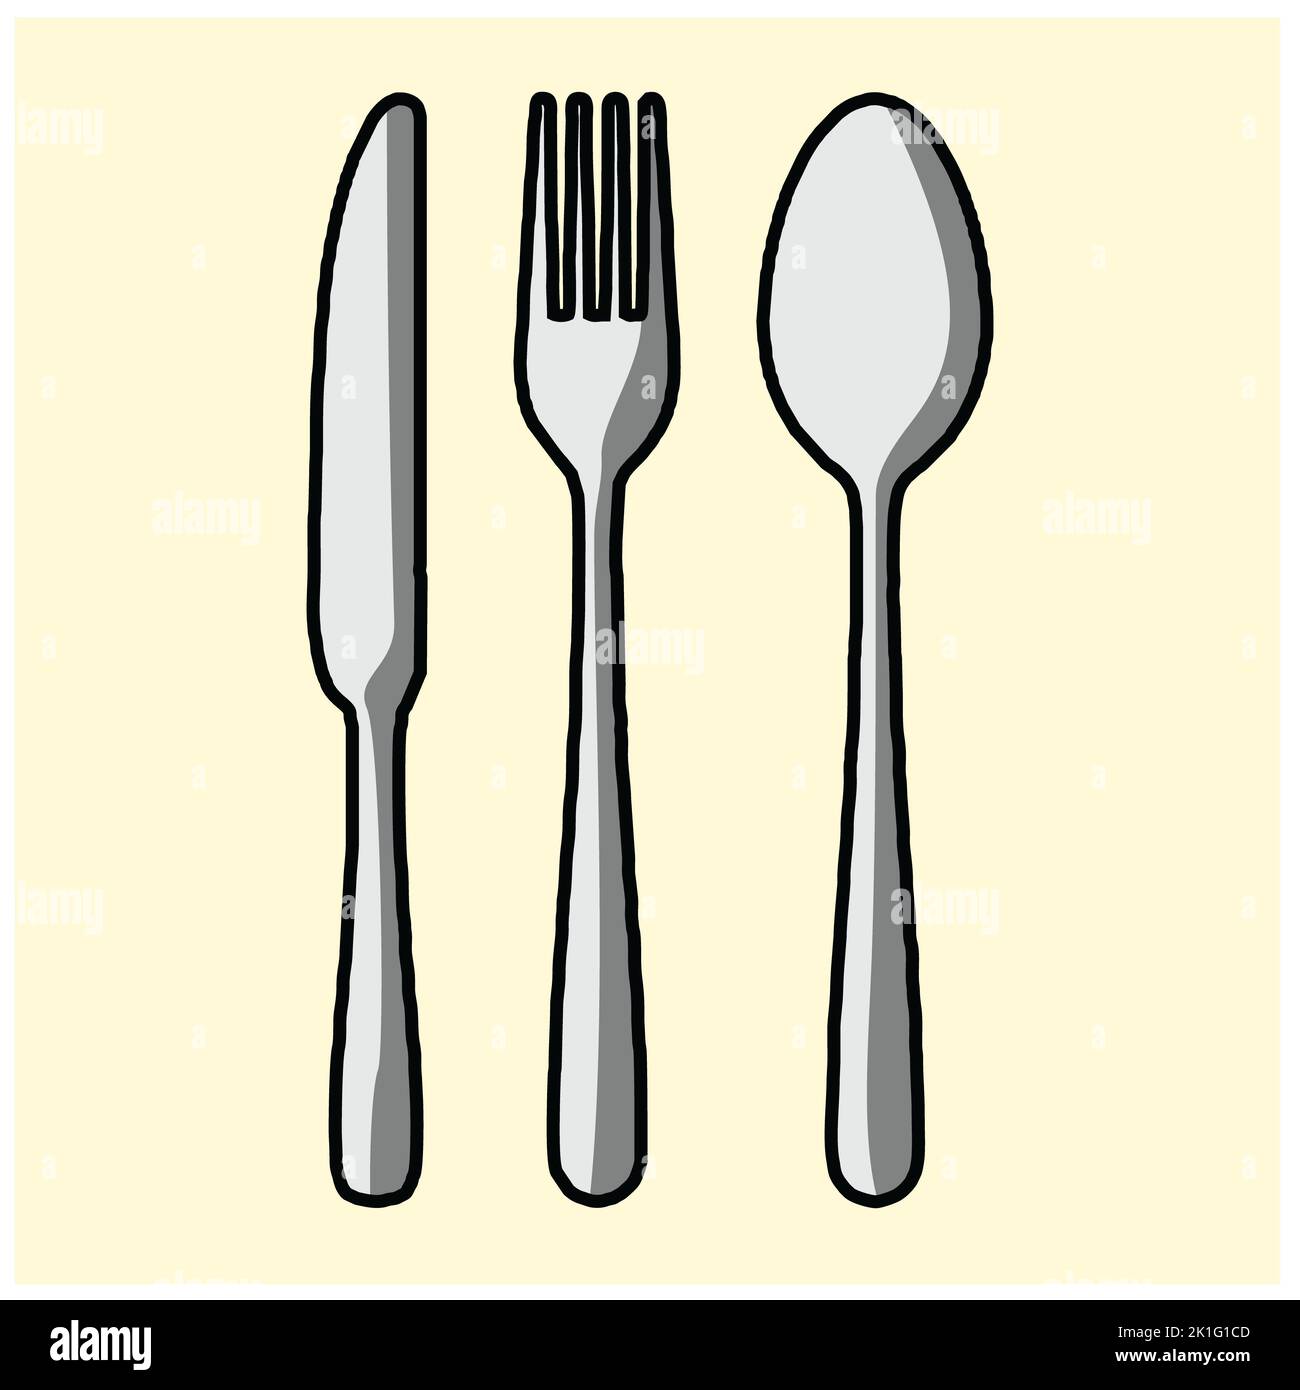 Cutlery silhouettes. Fork spoon knife black icon set. Black silverware sign. Vector utensil illustration restaurant symbols or label like concept cook Stock Photo